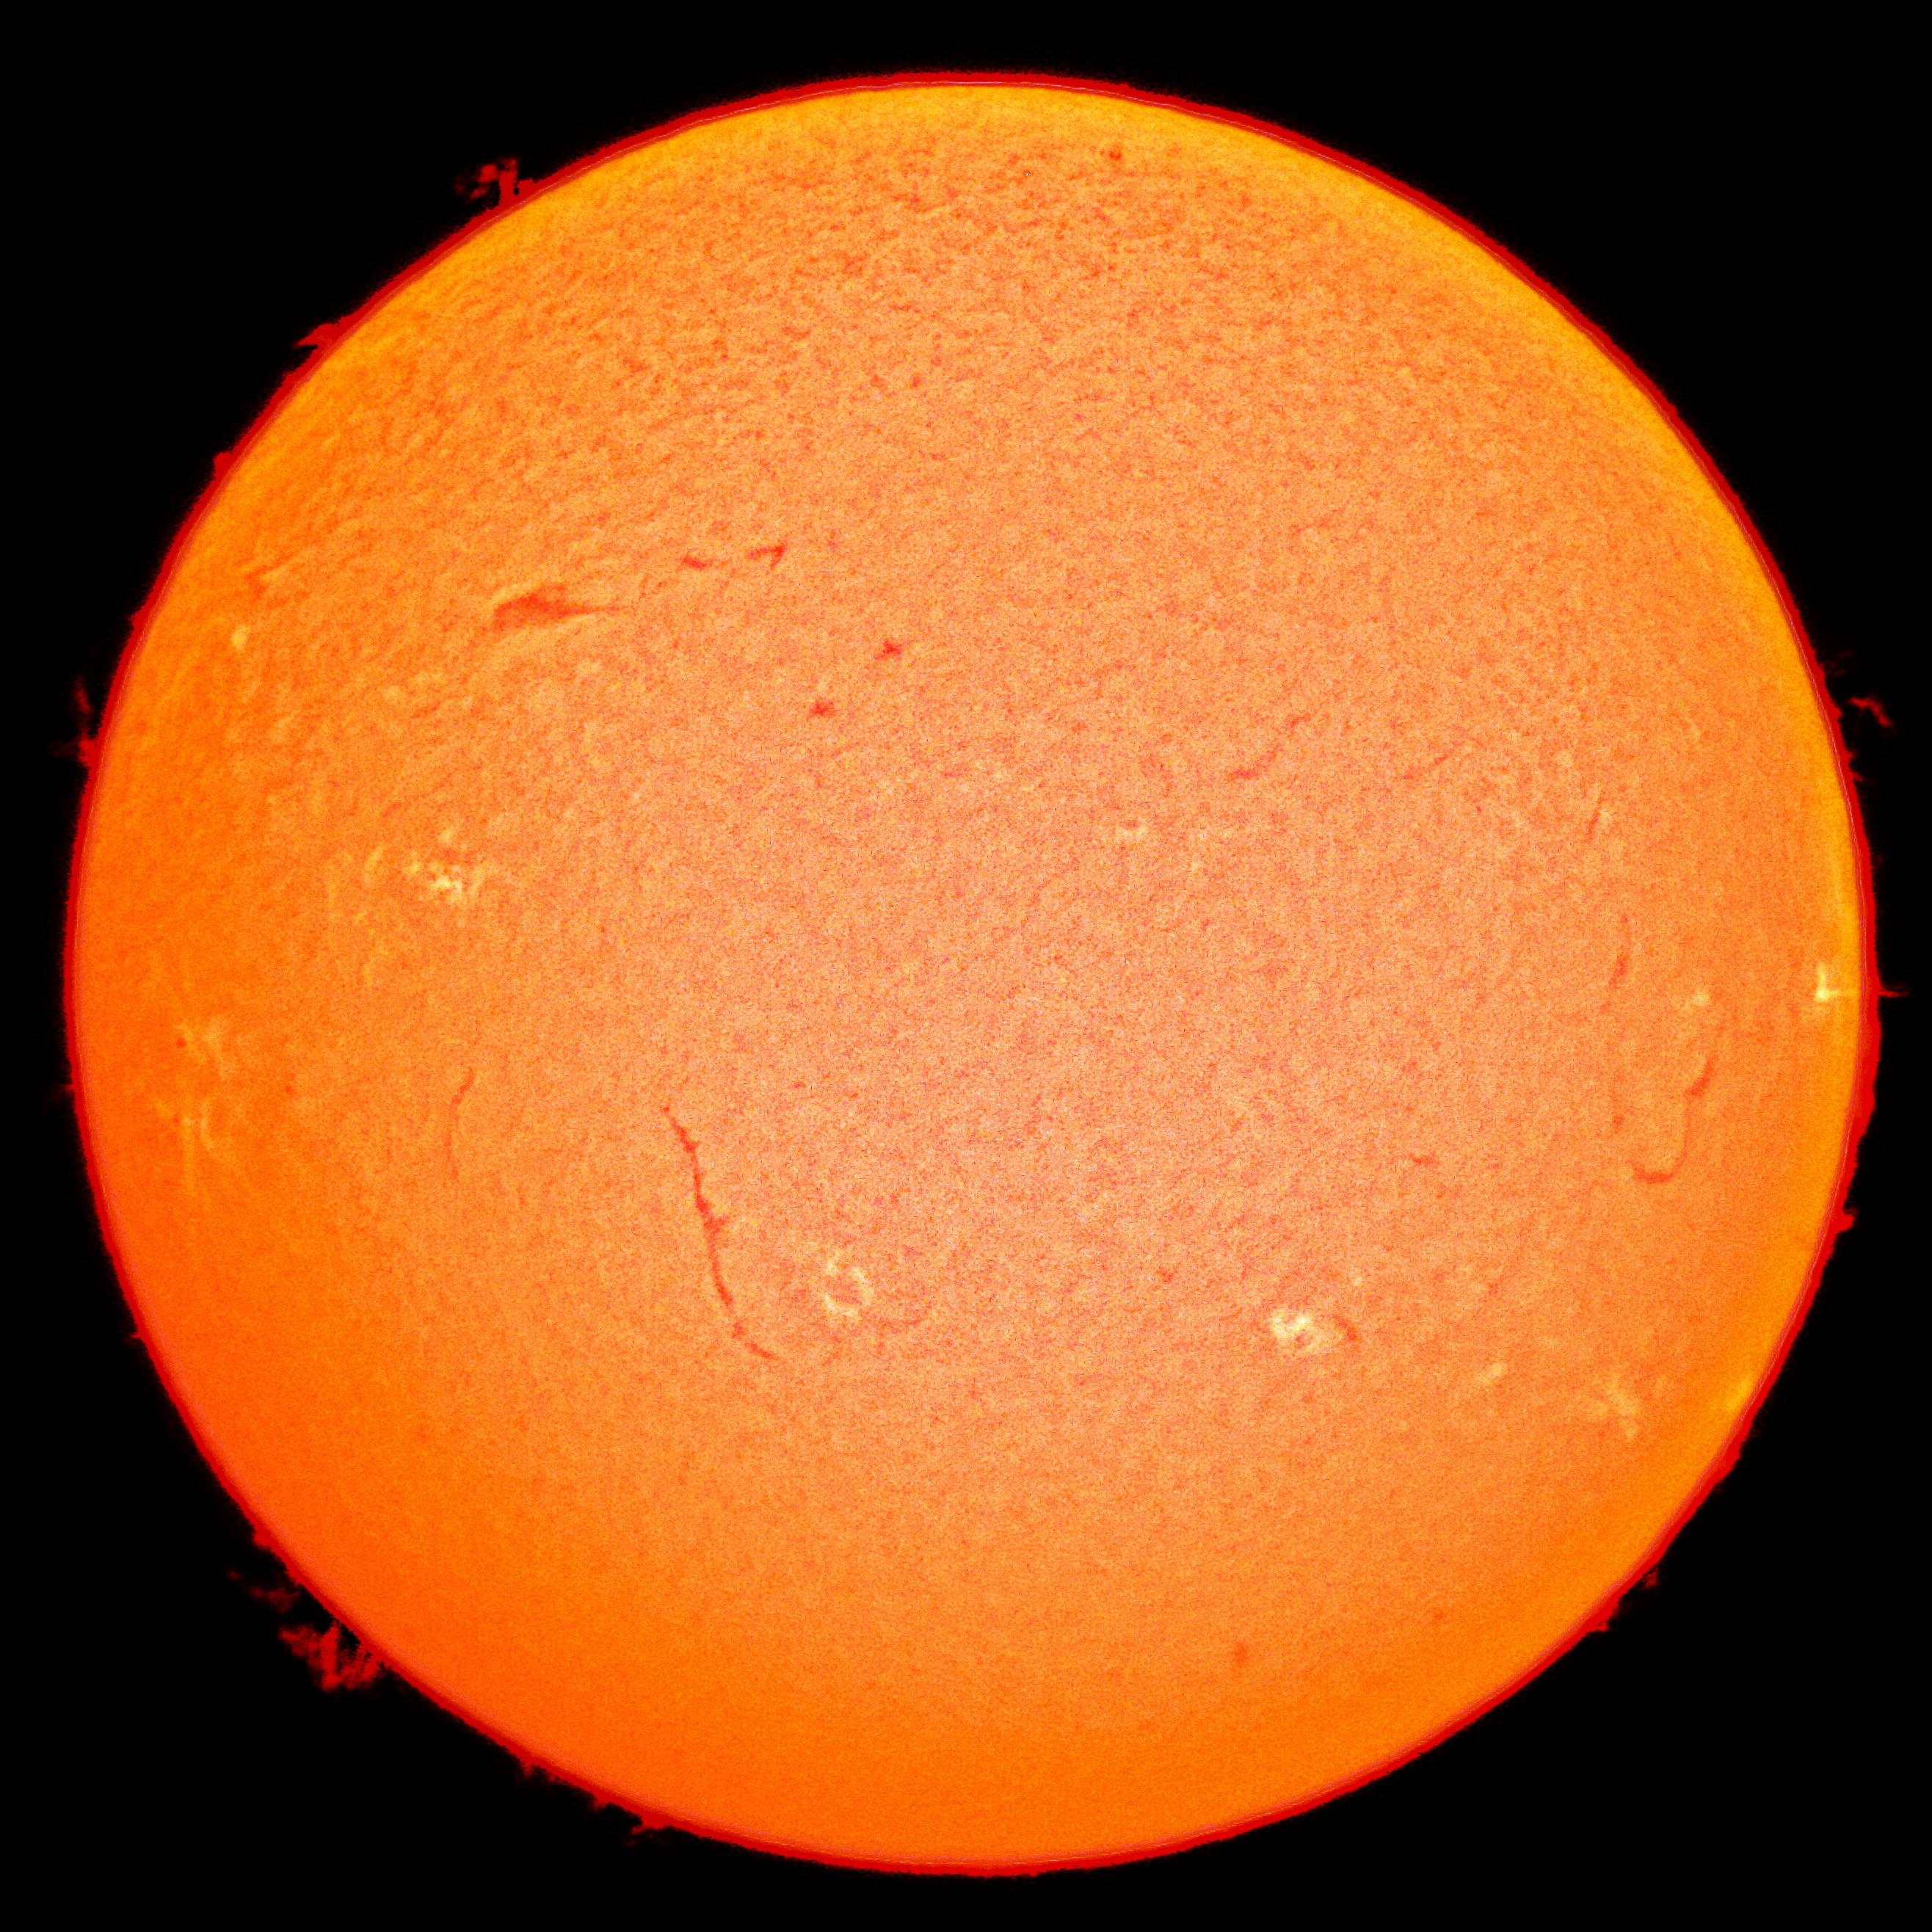 The Sun is the source of energy for most of life on Earth. It derives its energy mainly from nuclear fusion in its core, converting mass to energy as protons are combined to form helium. This energy is transported to the sun’s surface then released into space mainly in the form of radiant (light) energy.